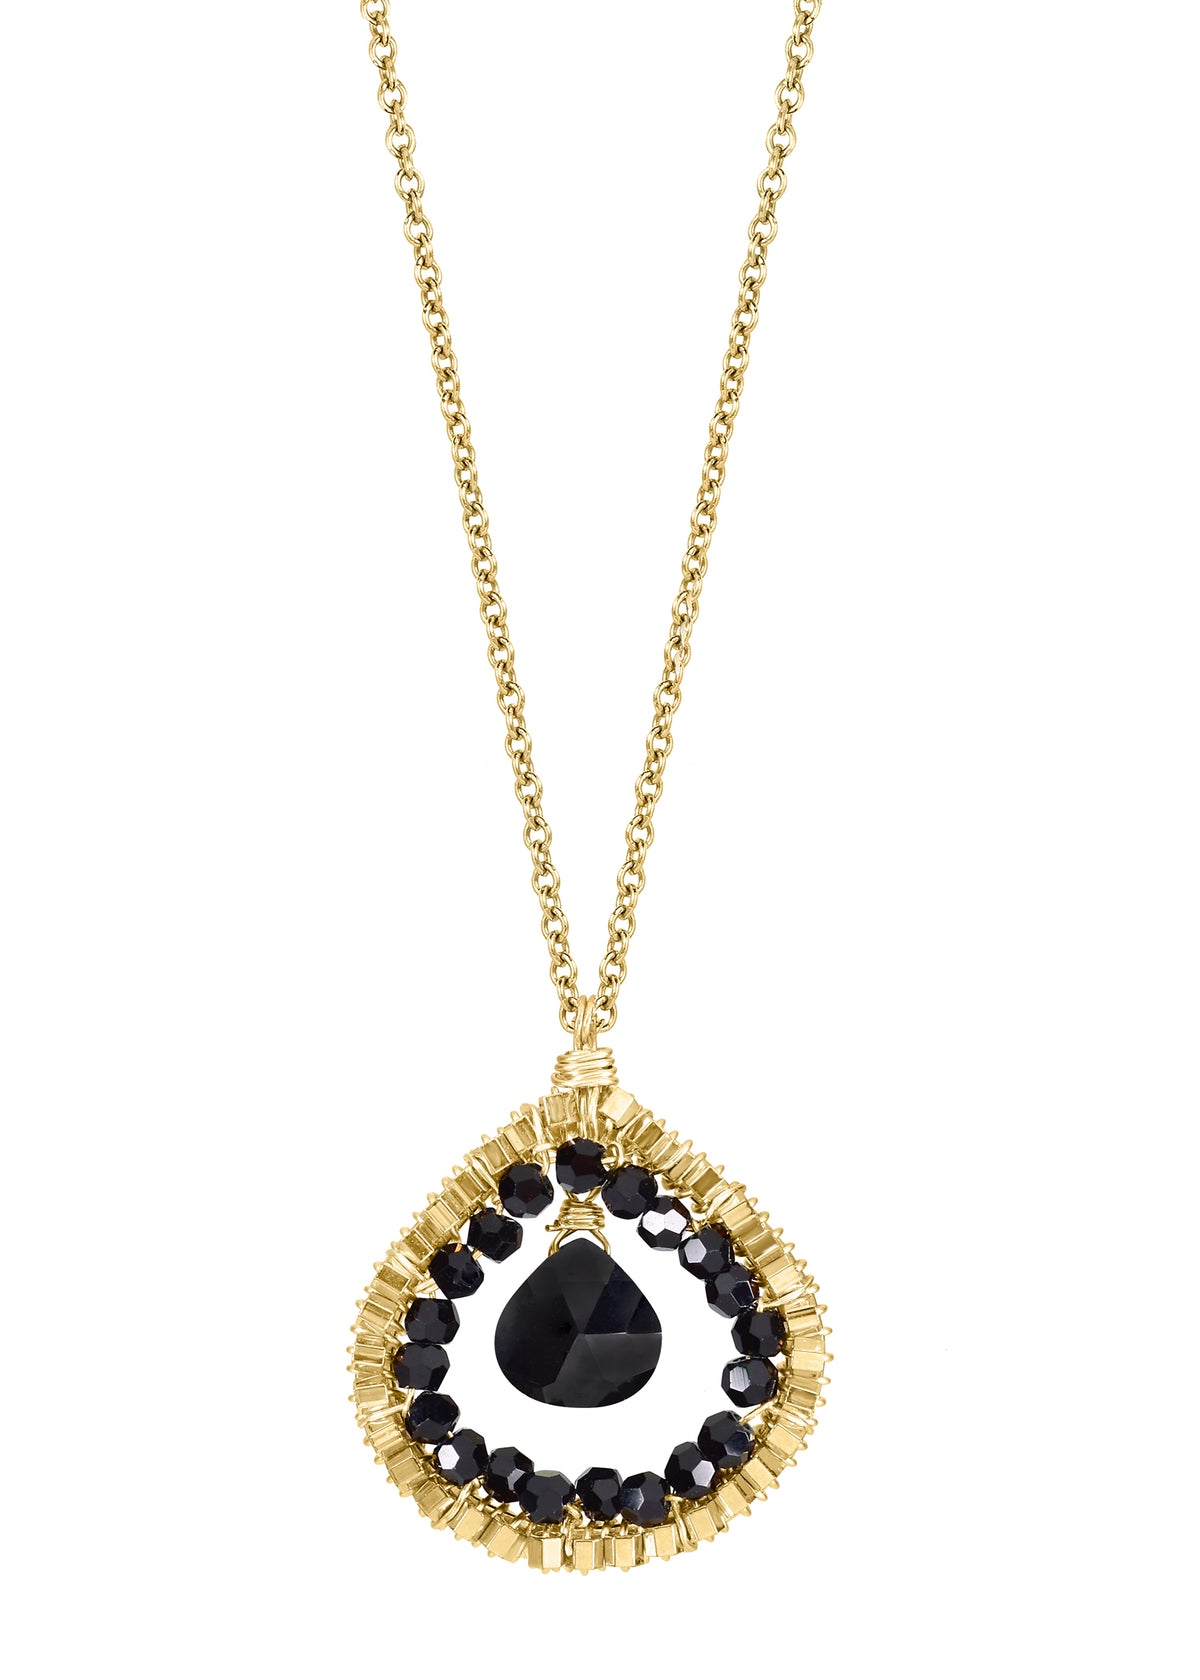 Black spinel Crystal Seed beads 14k gold fill Necklace measures 17&quot; in length Pendant measures 11/16&quot; in length and 5/8&quot; in width at the widest point Handmade in our Los Angeles studio